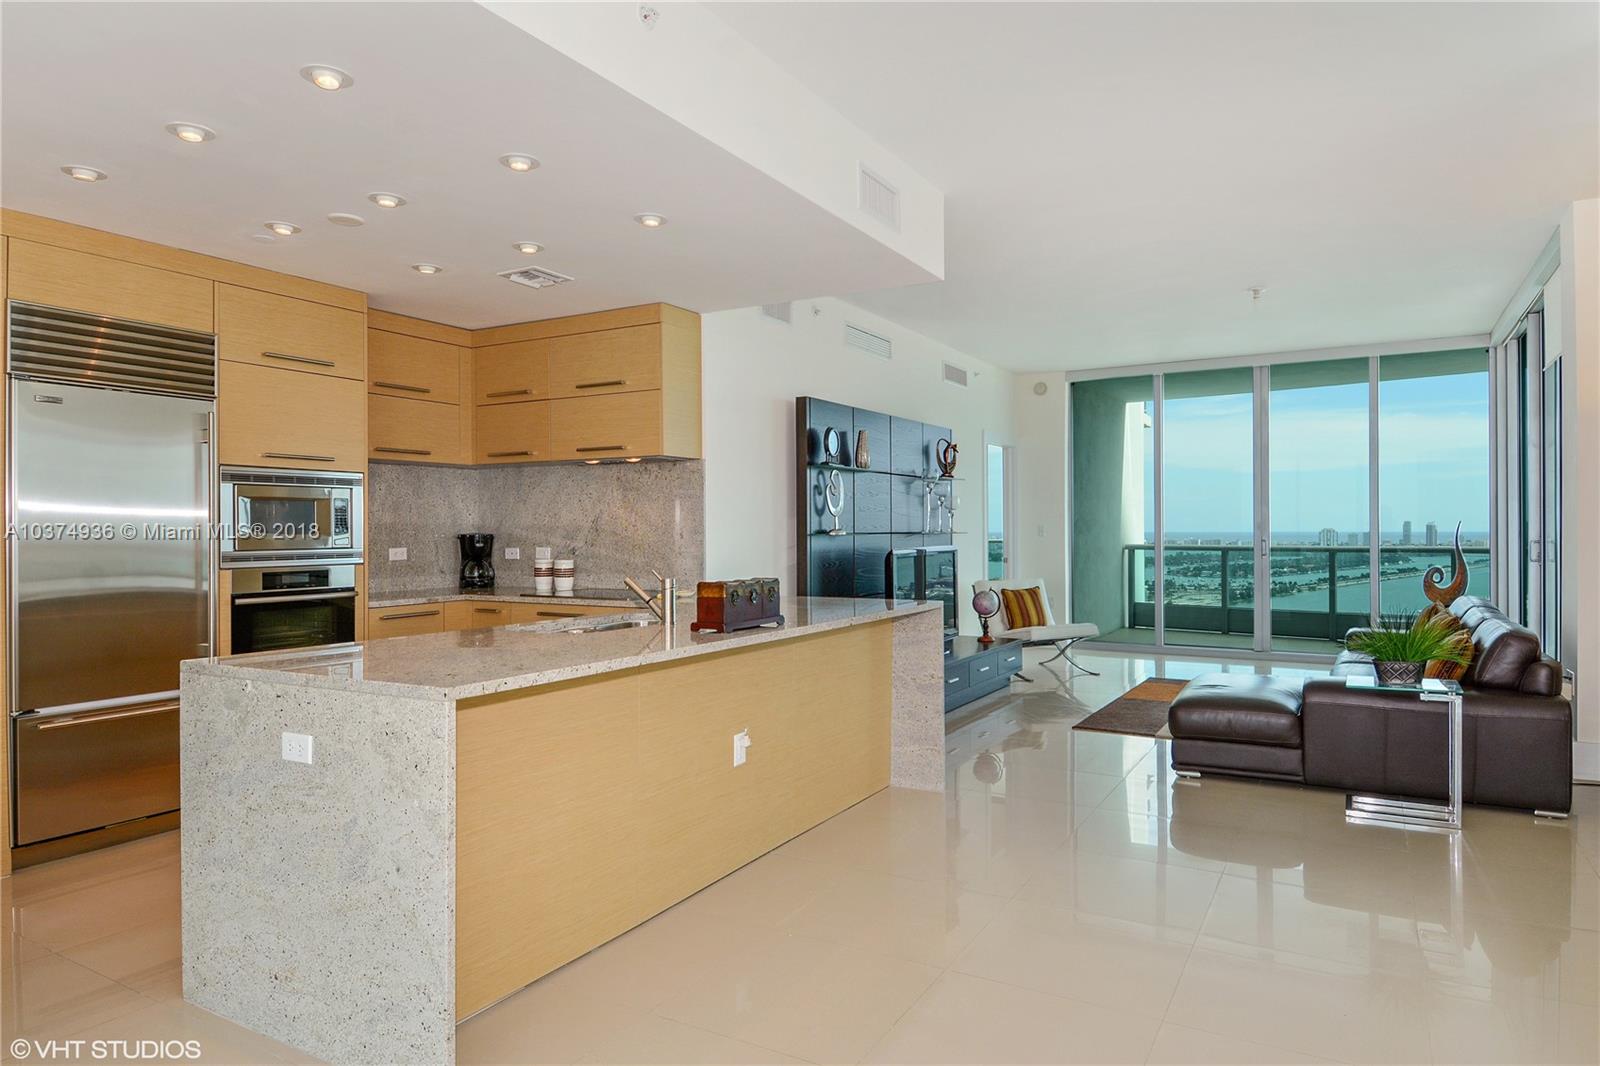 a large kitchen with a large window and stainless steel appliances